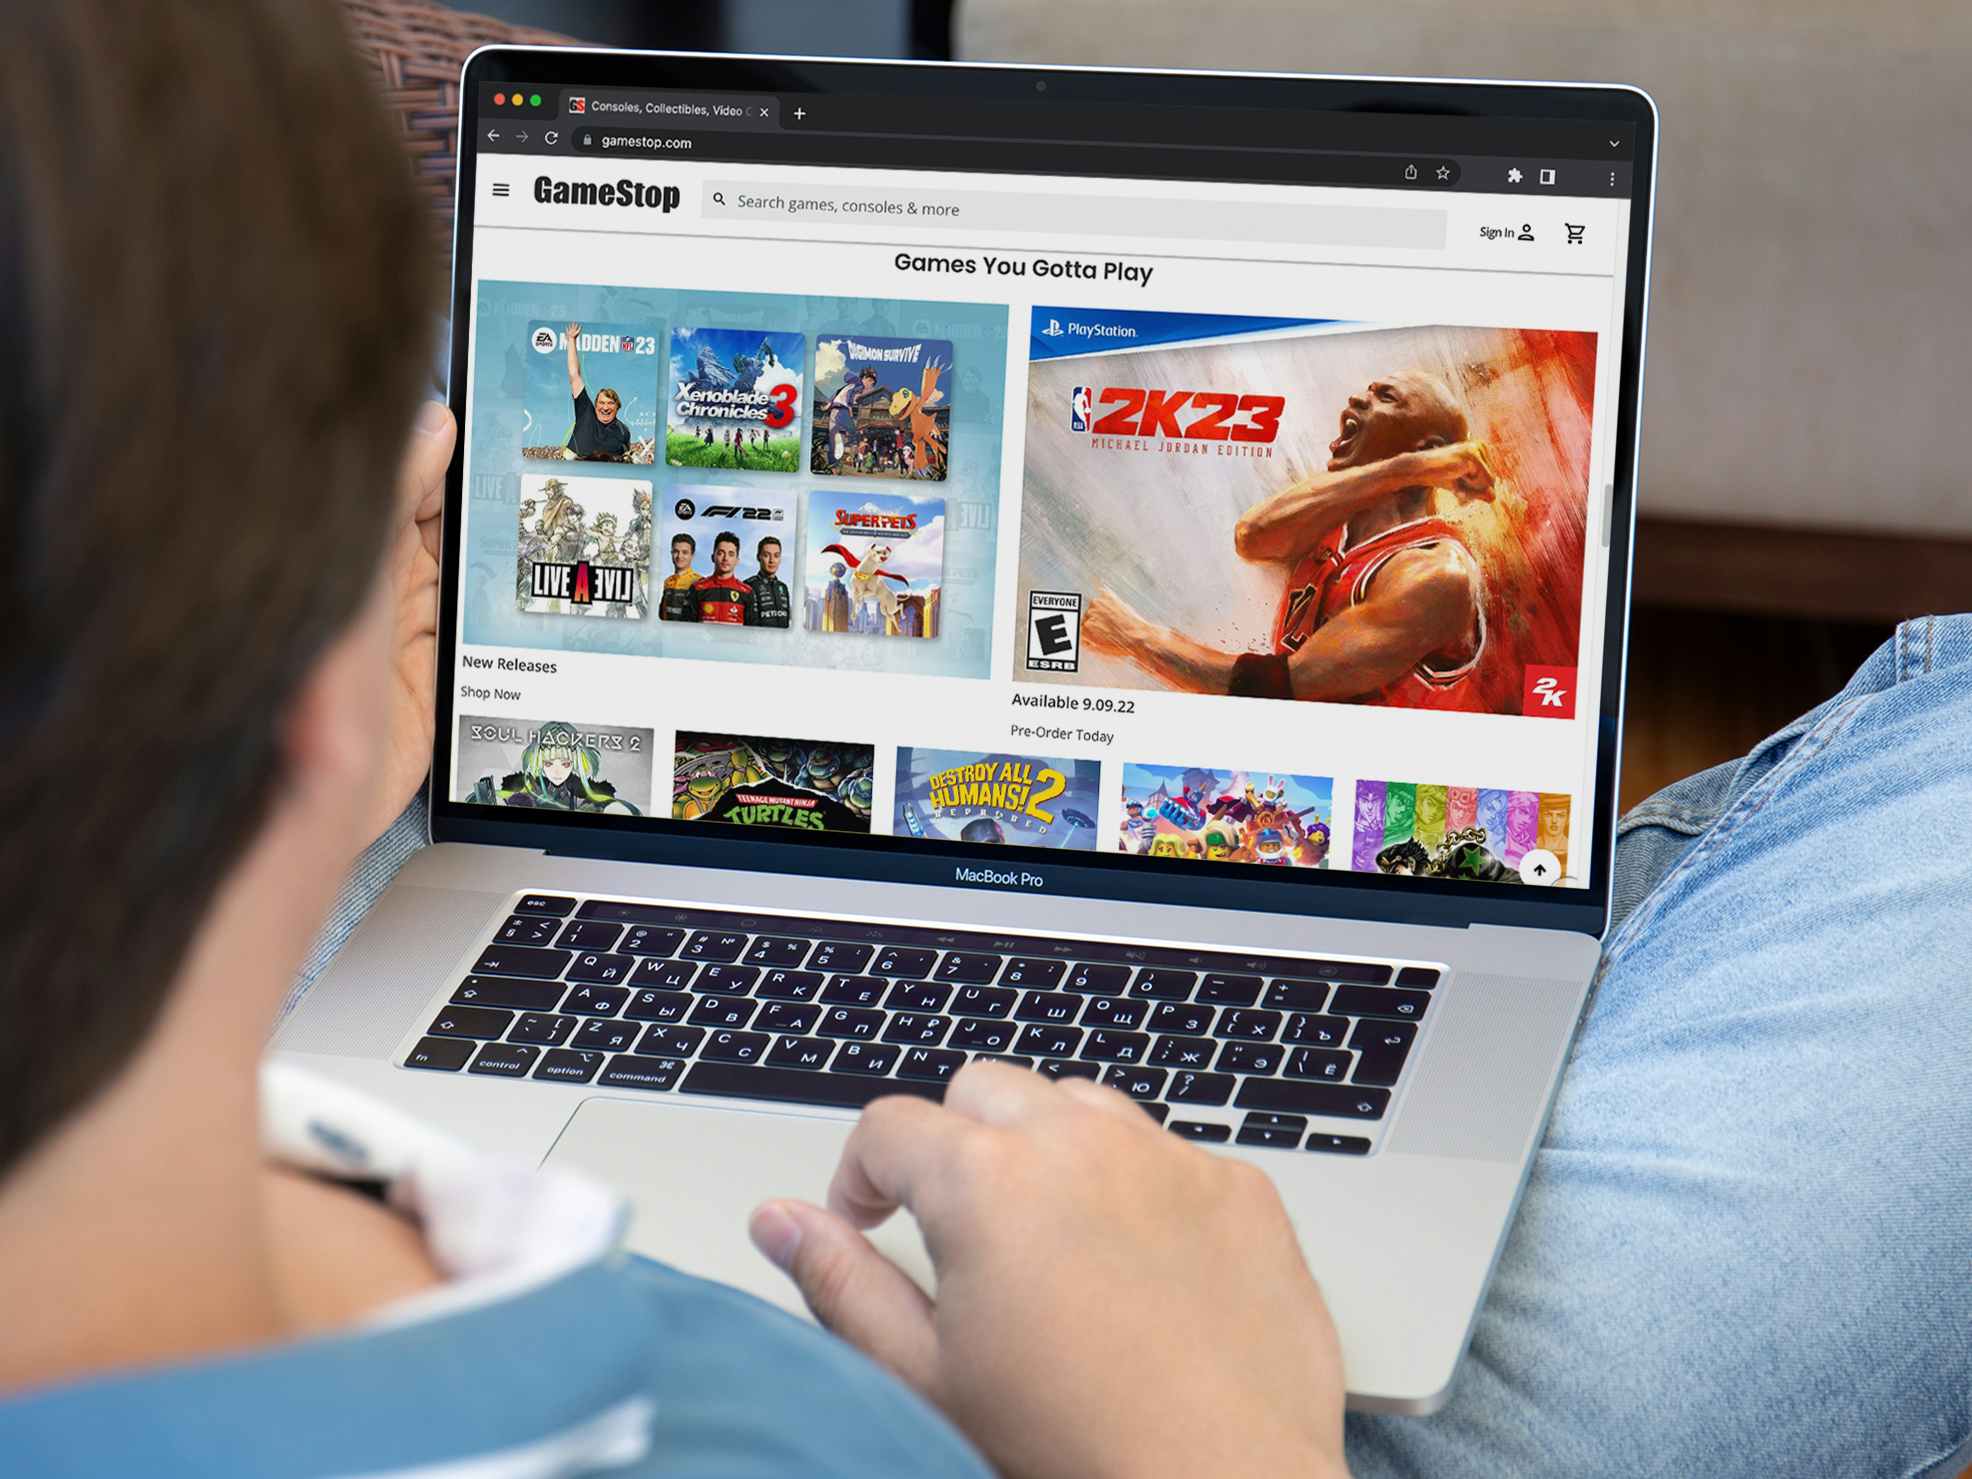 A person using a laptop displaying GameStop's website.